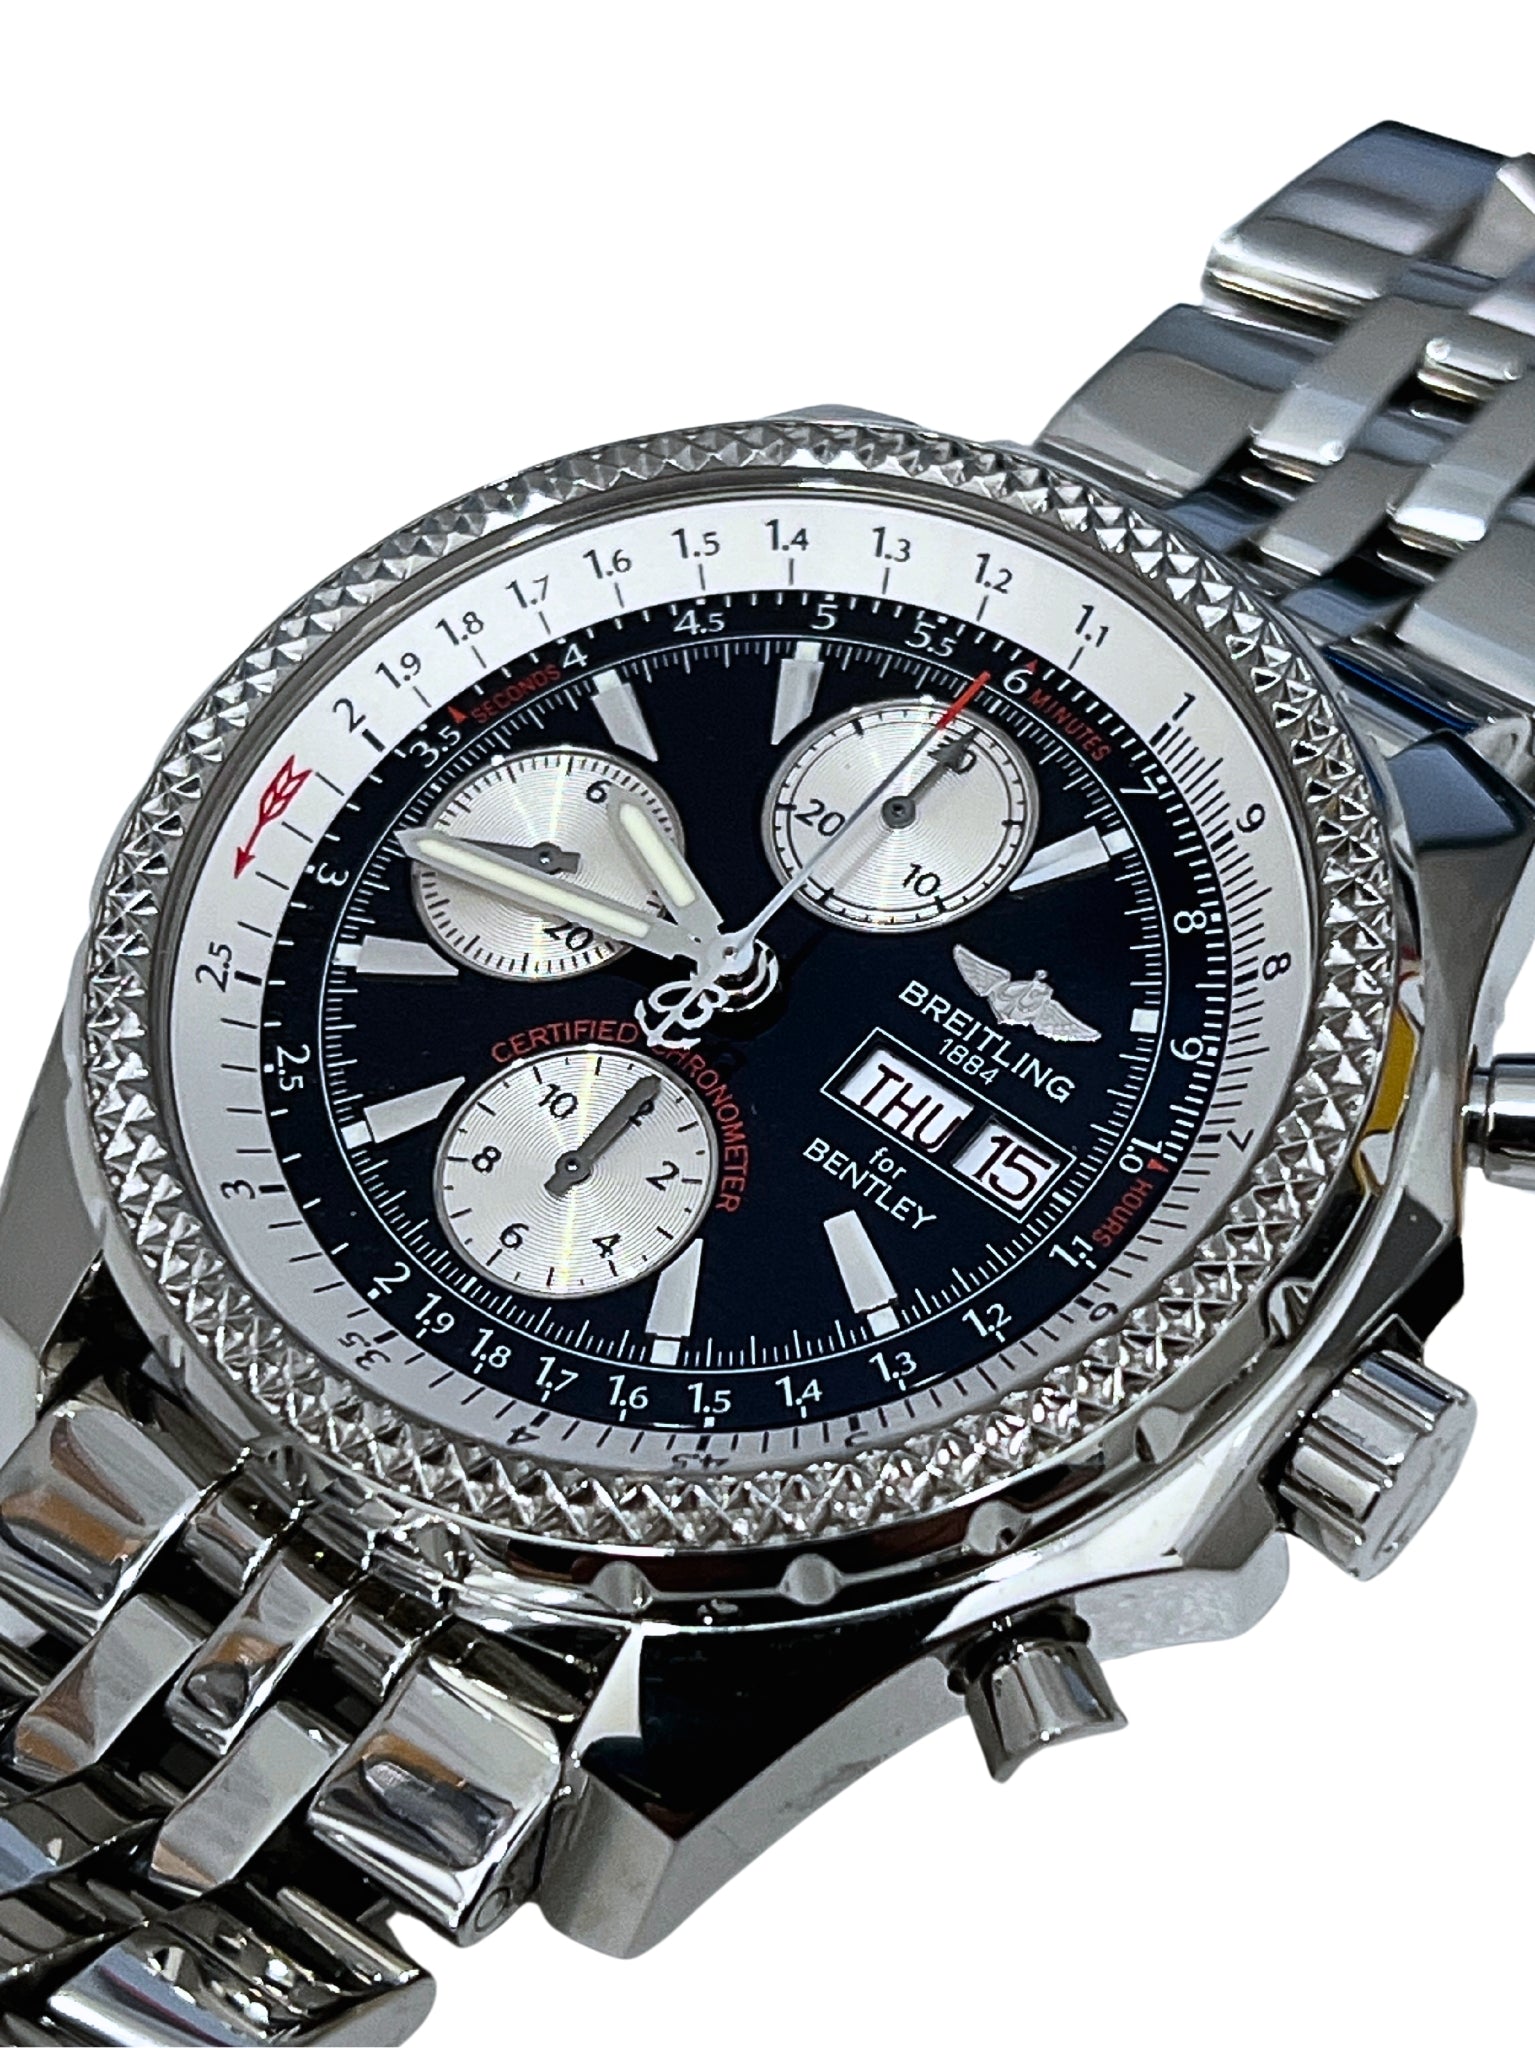 Breitling Bentley GT Automatic Chronograph Continental Chronometer